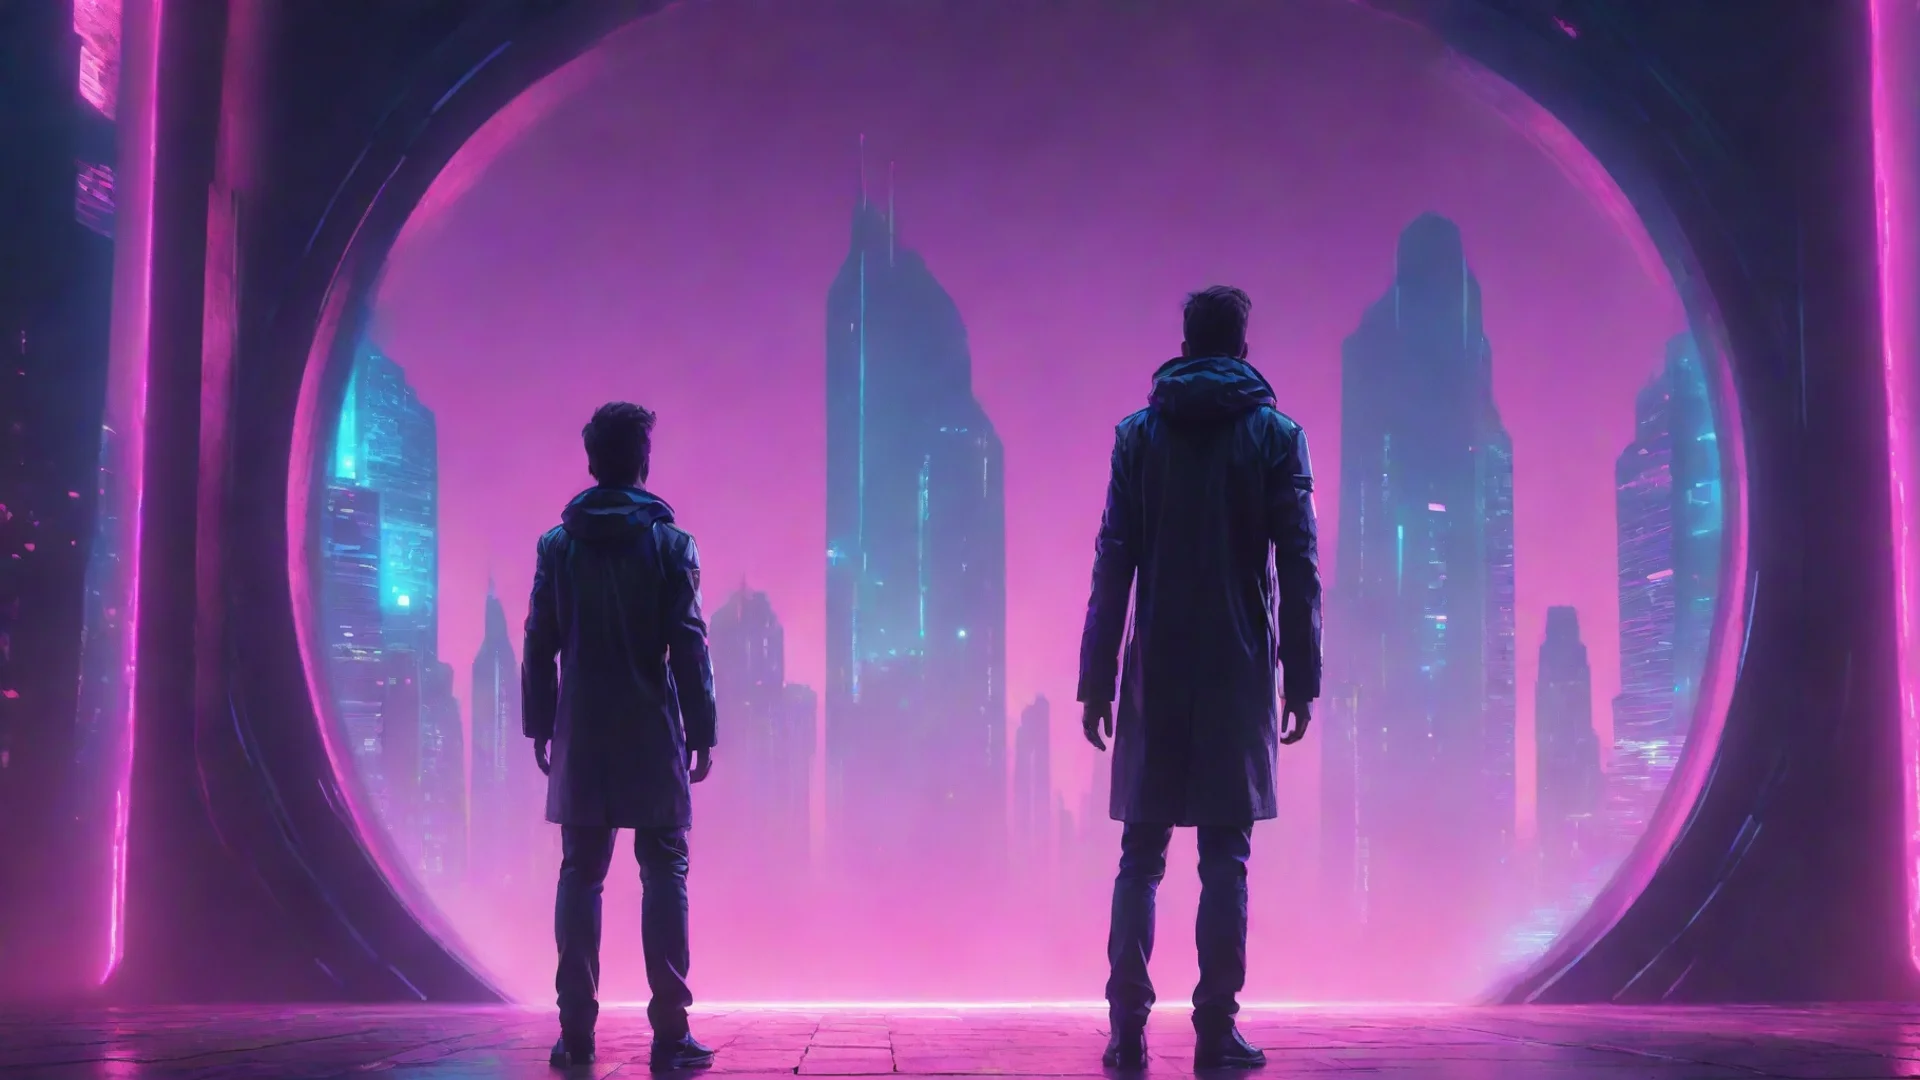 trending synthwave of one man standing behind the portal of the futuristic city good looking fantastic 1 wide